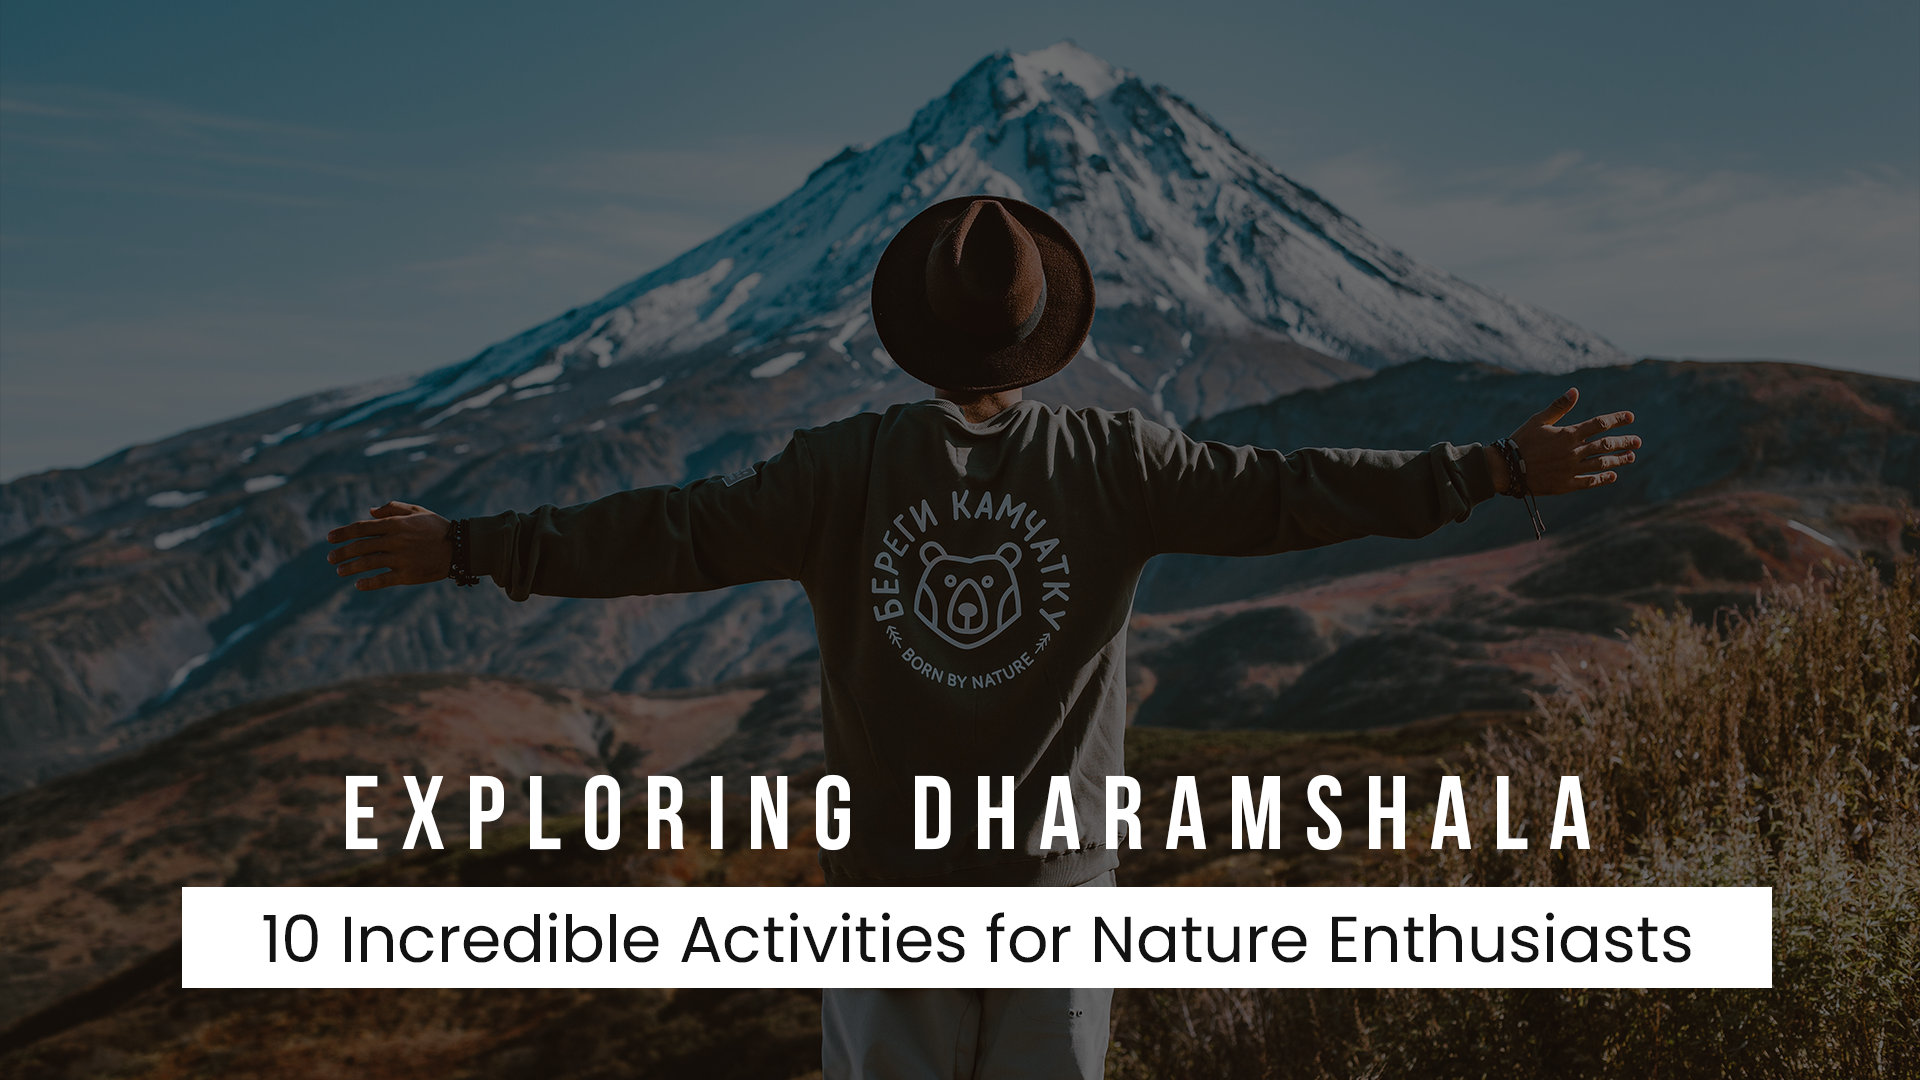 Exploring Dharamshala: 10 Incredible Activities for Nature Enthusiasts